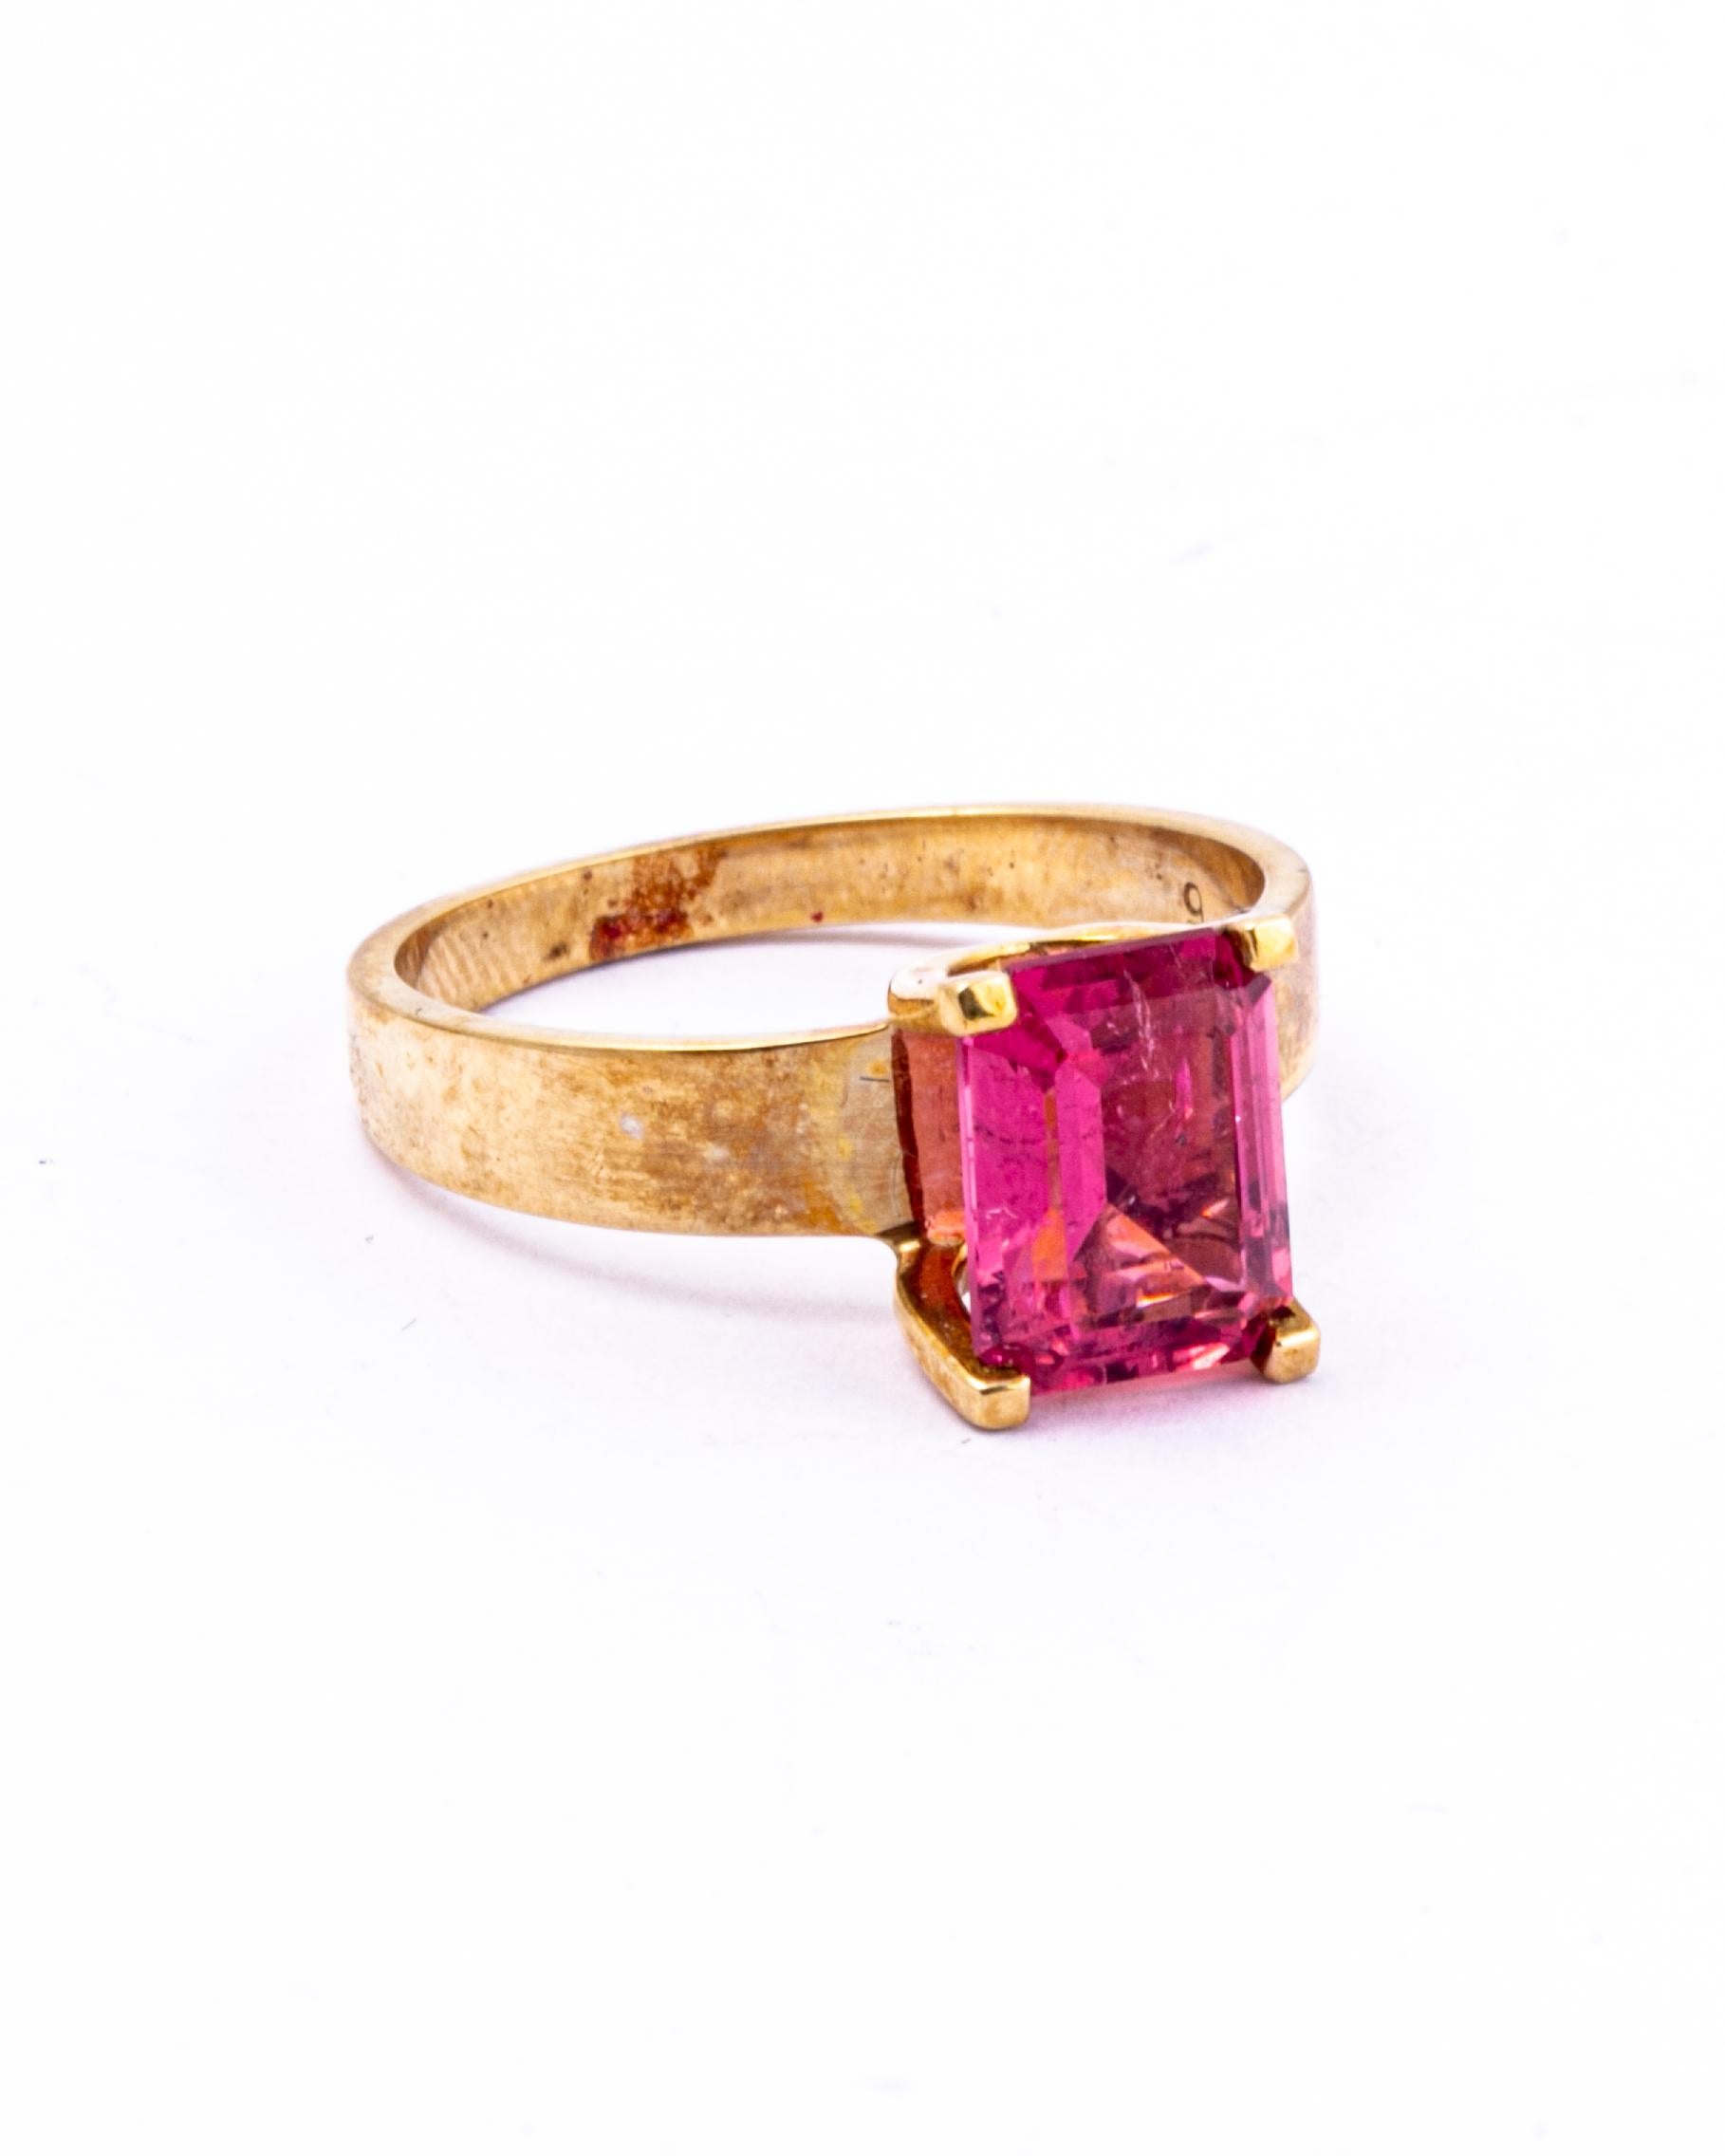 The pink tourmaline is gorgeous and set simply up high in this 9 carat gold ring. The band has a really clean and chunky feel to it.

Ring Size: N or 6 3/4 
Height Off Finger: 7mm
Stone Diameter: 9x7mm

Weight: 2.9g